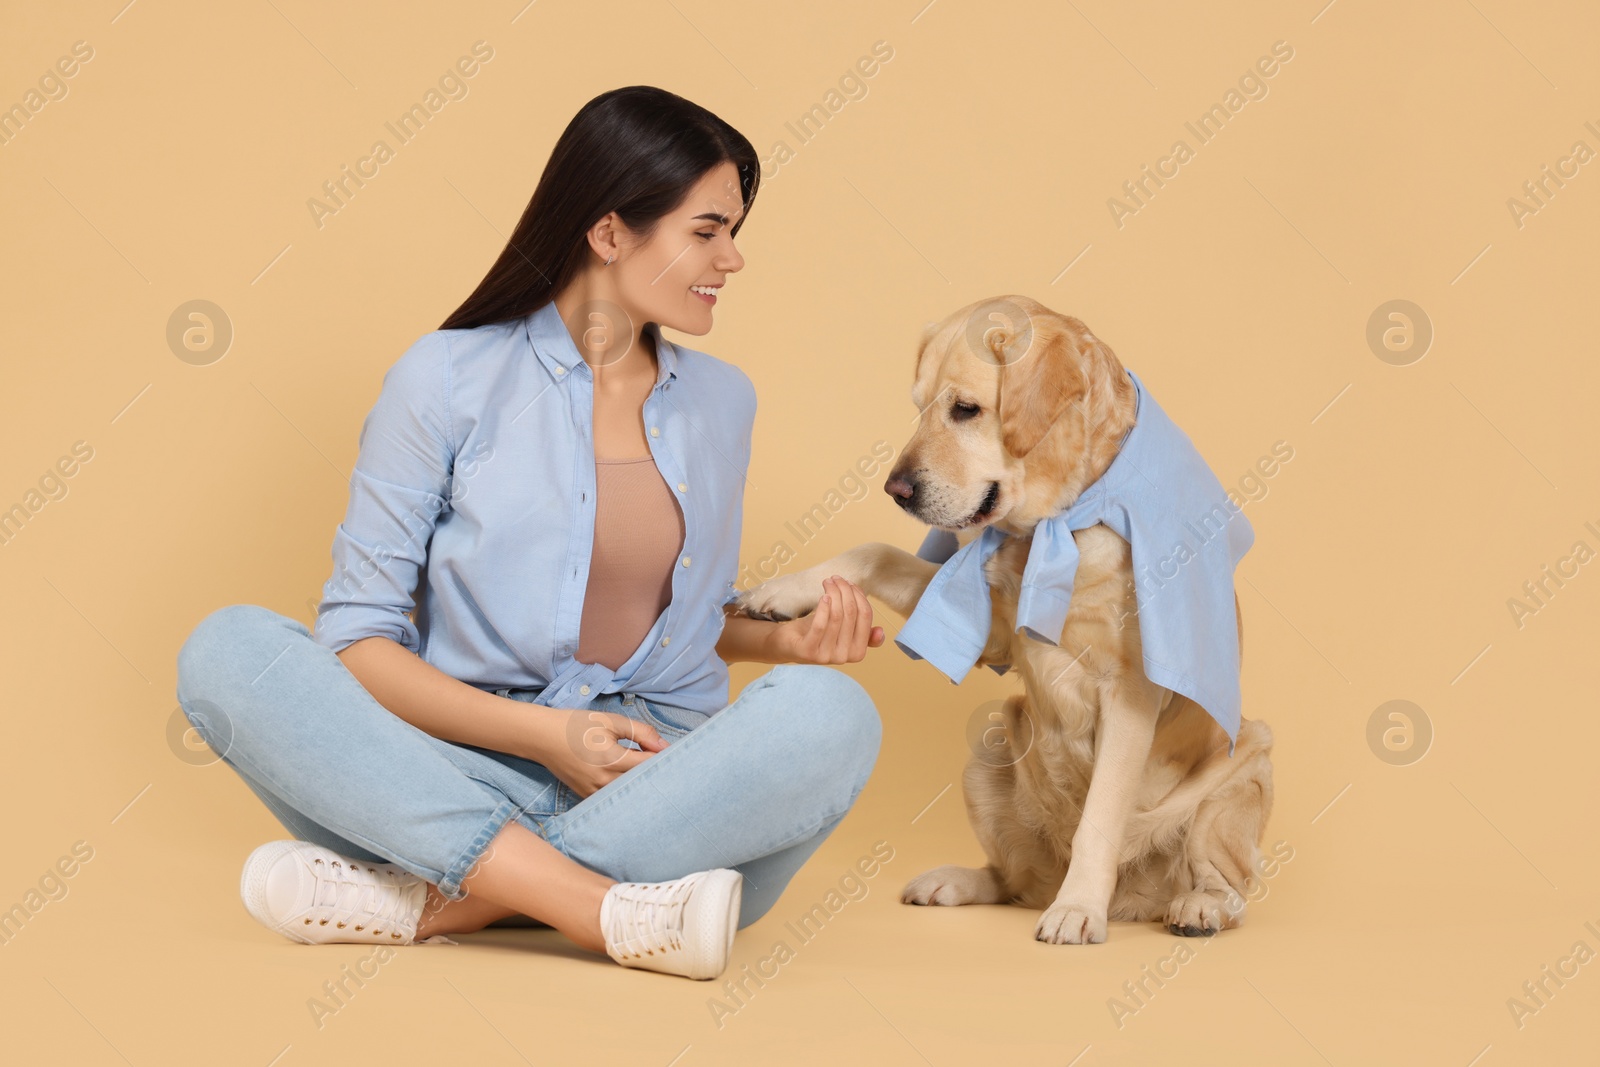 Photo of Cute Labrador Retriever giving paw to happy owner on beige background